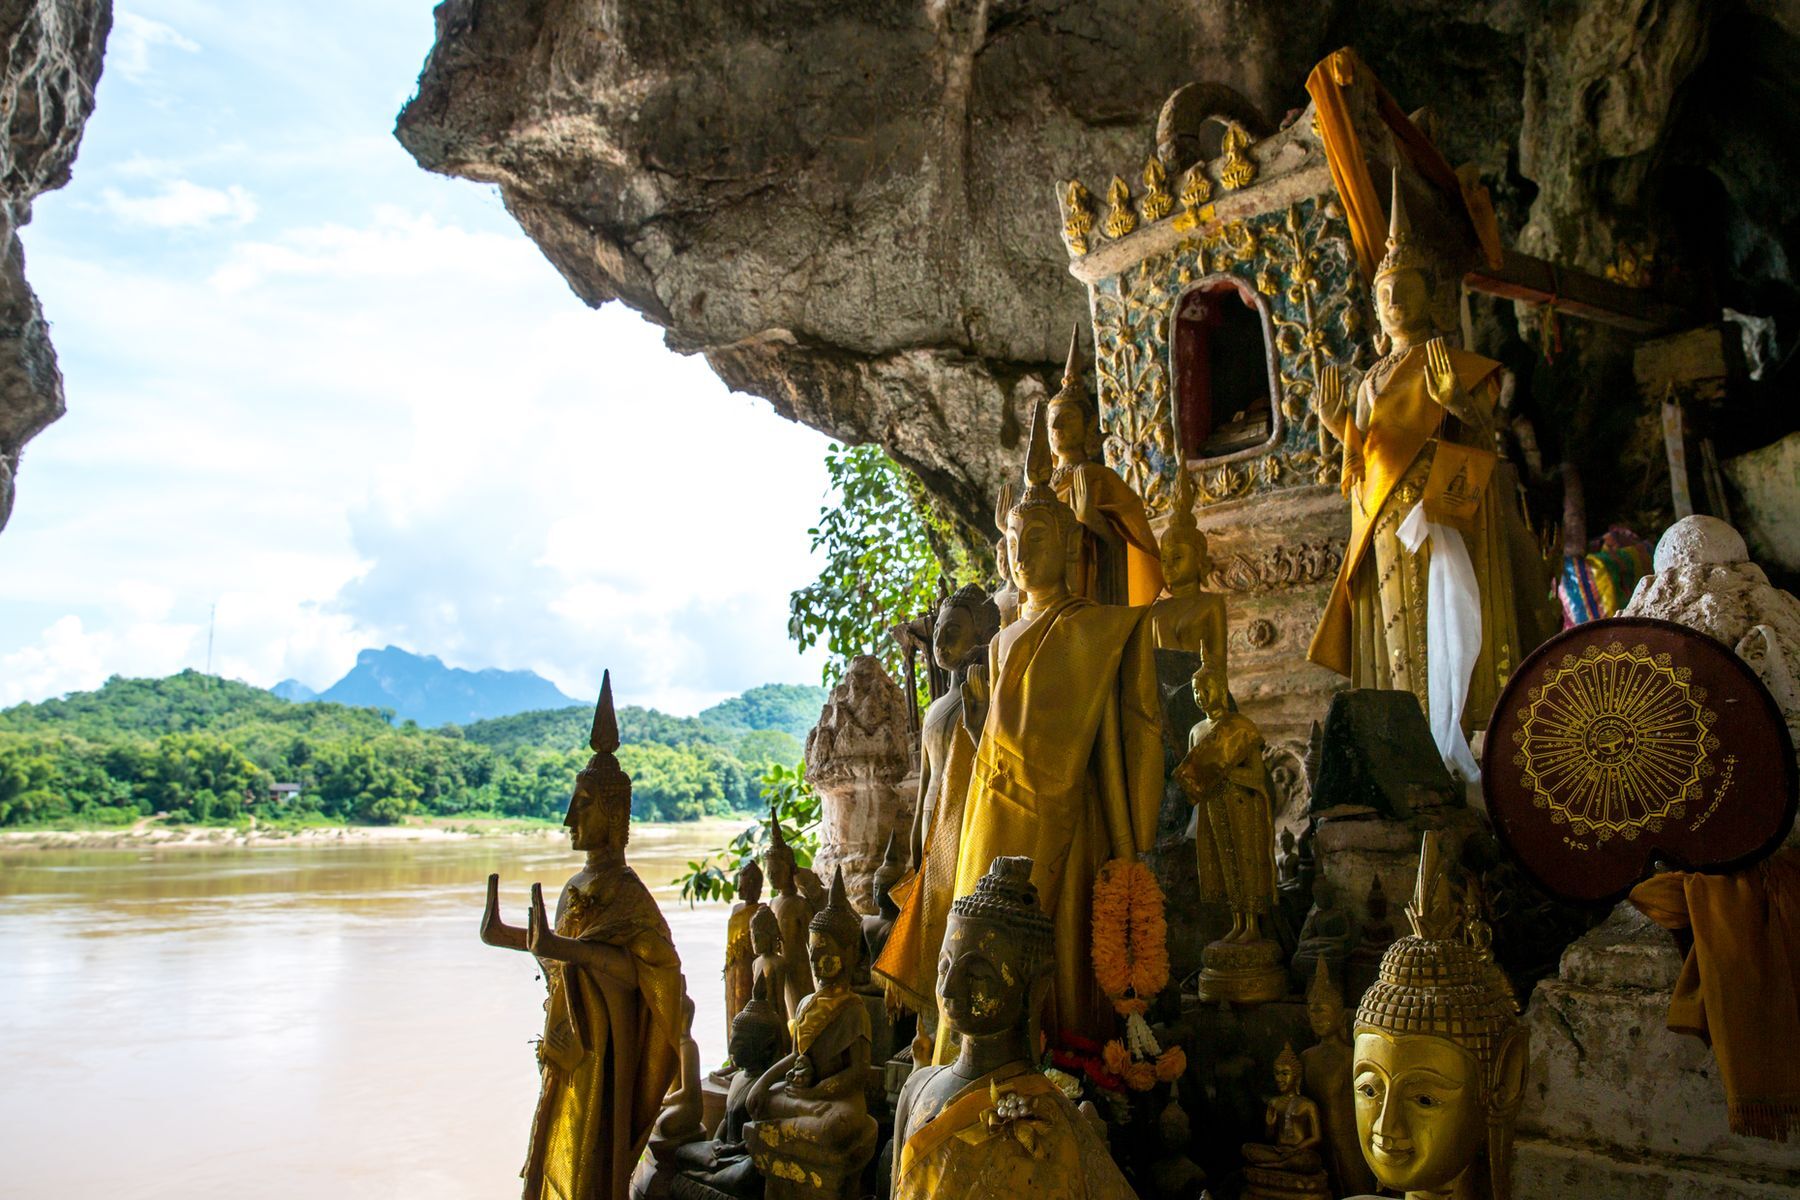 <p>Located in northern Laos, Luang Prabang is a <a href="https://www.lonelyplanet.com/laos/northern-laos/luang-prabang" rel="noreferrer noopener">haven of peace and spirituality</a>. Indeed, this city offers several <a href="https://www.ecotourismlaos.com/index.php/travel-guide/provincial-highlight/190-luang-prabang-province" rel="noreferrer noopener">ecotourist</a> <a href="https://www.ecotourismlaos.com/index.php/travel-guide/provincial-highlight/190-luang-prabang-province" rel="noreferrer noopener">activities</a> that respect its harmonious atmosphere. Travelling on foot, for instance, is not only free, but enables visitors to observe, at their own pace, the fusion of Laos’s traditional urban architecture and that of the city’s colonial era. Luang Prabang’s unique landscape has also earned it a place among <a href="https://whc.unesco.org/en/list/479/" rel="noreferrer noopener">UNESCO’s World Heritage Sites</a>. Finally, about 25 kilometres (15 miles) from the city, you’ll find the <a href="https://www.atlasobscura.com/places/pak-ou-caves" rel="noreferrer noopener">Pak Ou caves</a>, a pilgrimage site housing thousands of Buddha statues. Entry costs only 20,000 kips (<a href="https://exchangerate.guru/lak/usd/20000/" rel="noreferrer noopener">US$1</a>).</p>